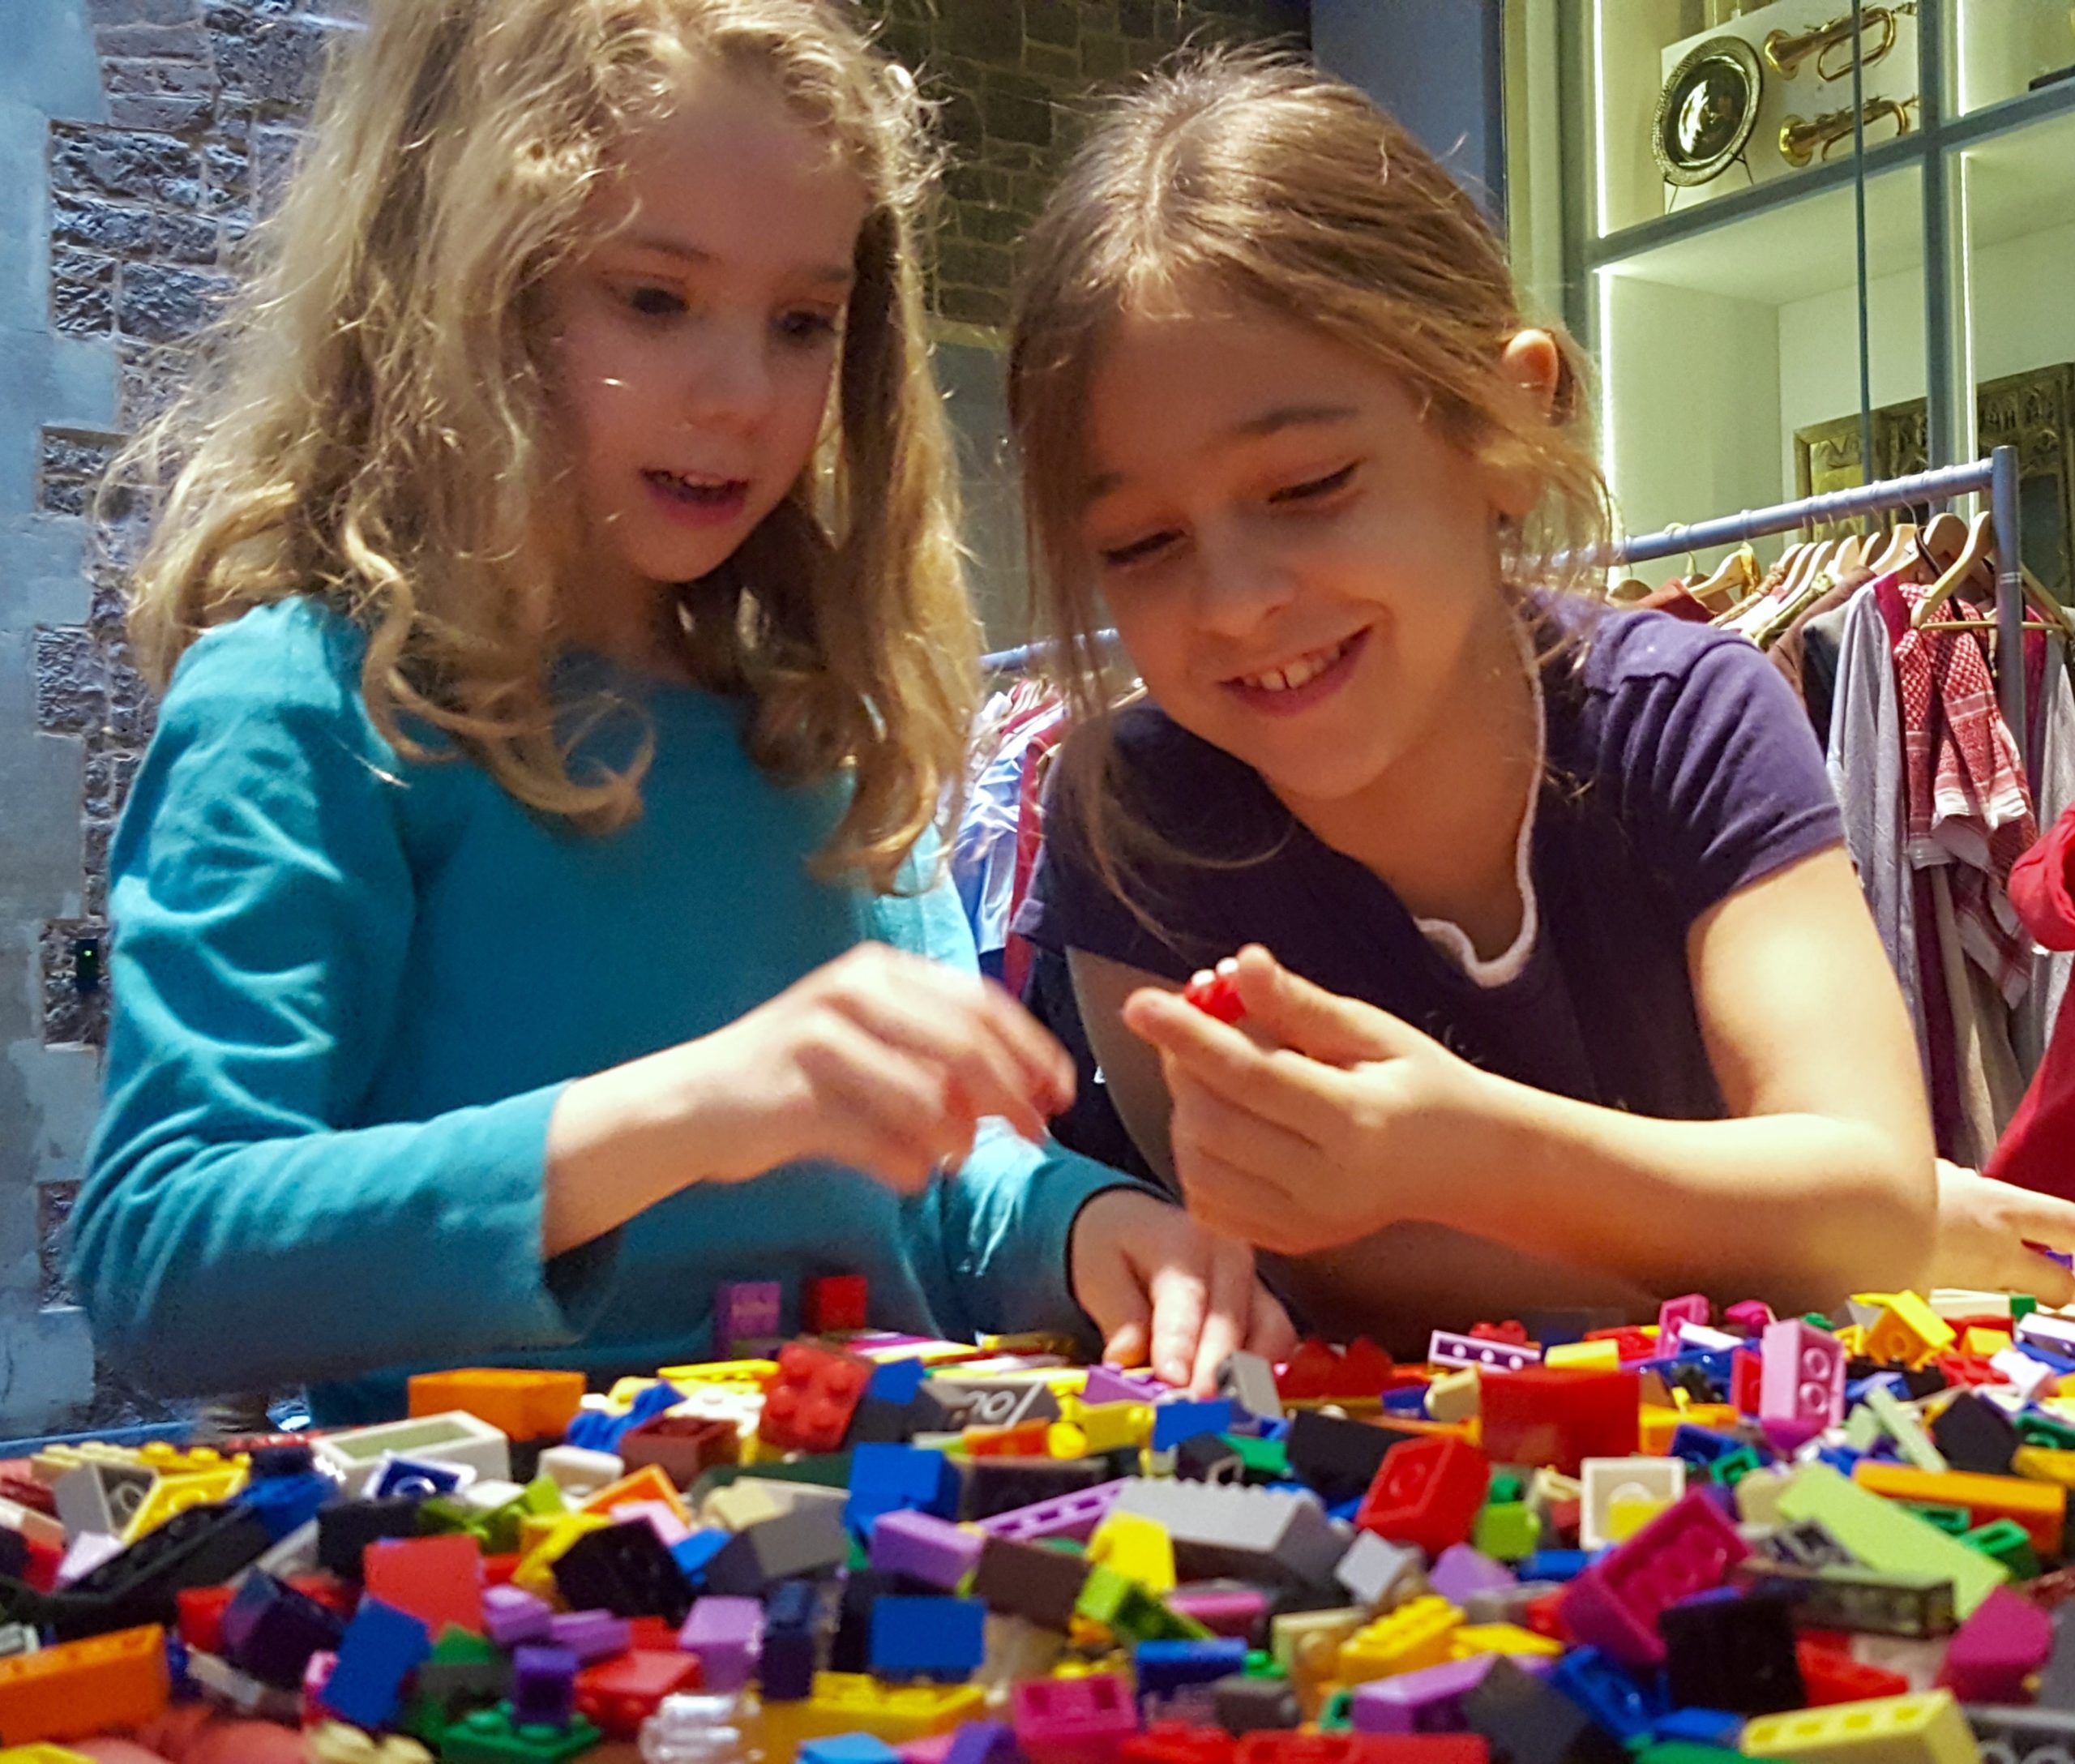 Two girls playing with Lego